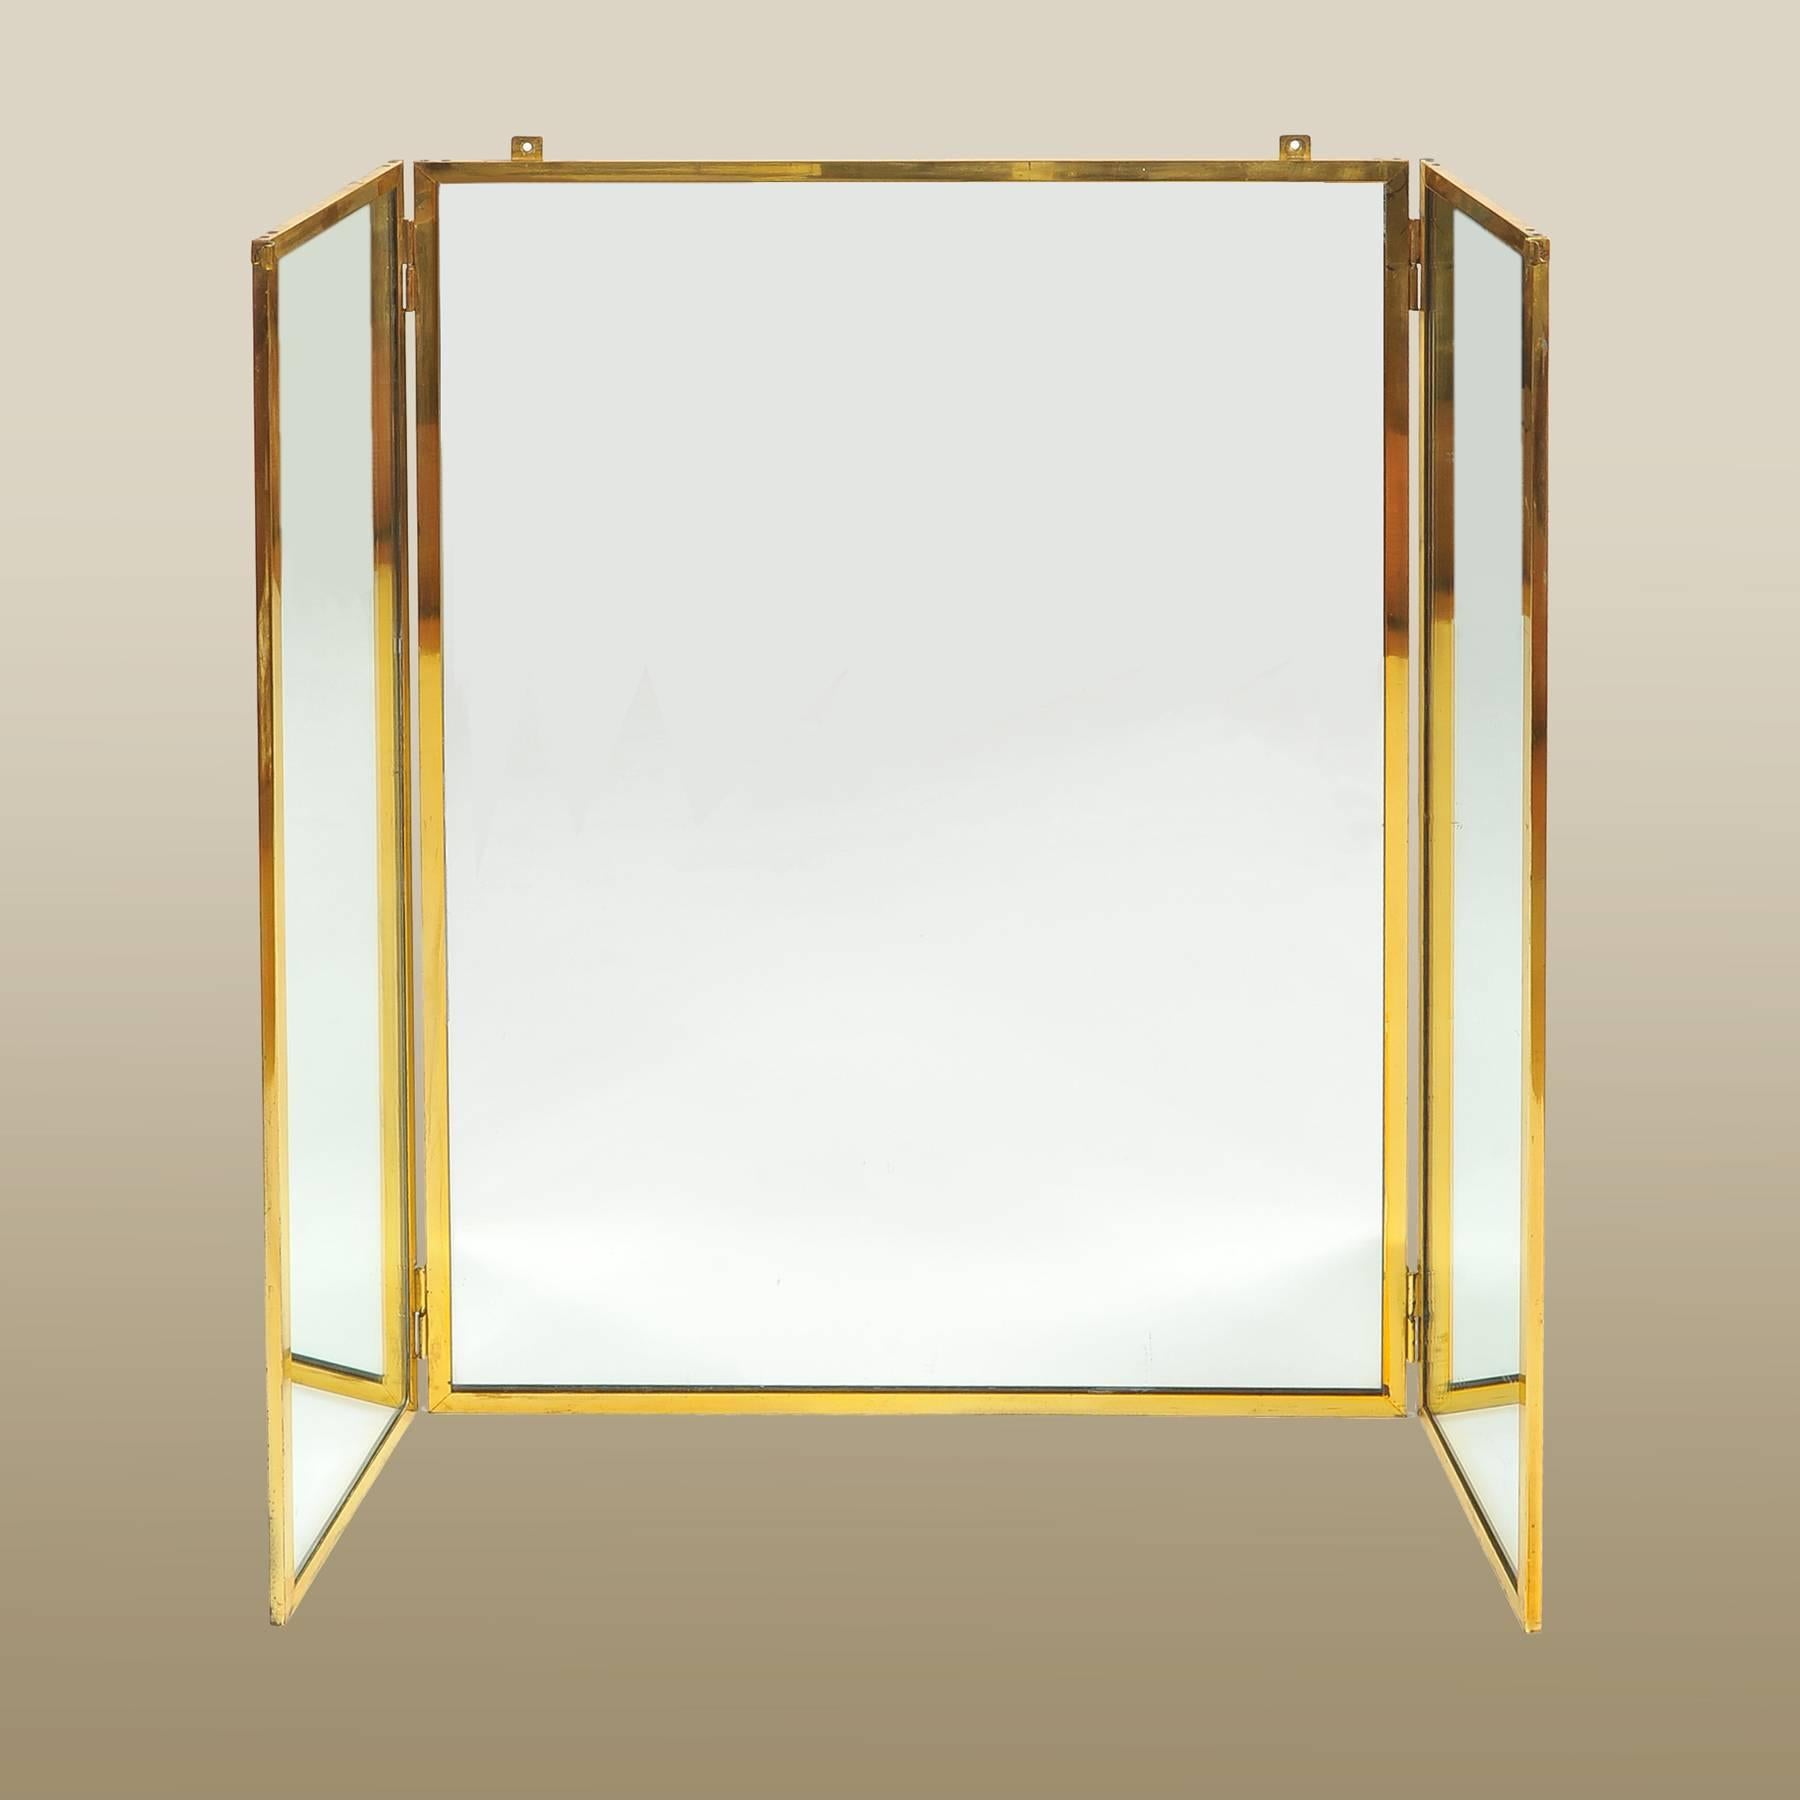 Brass triptych mirror suitable for hanging over a dressing table, felt-lined back.